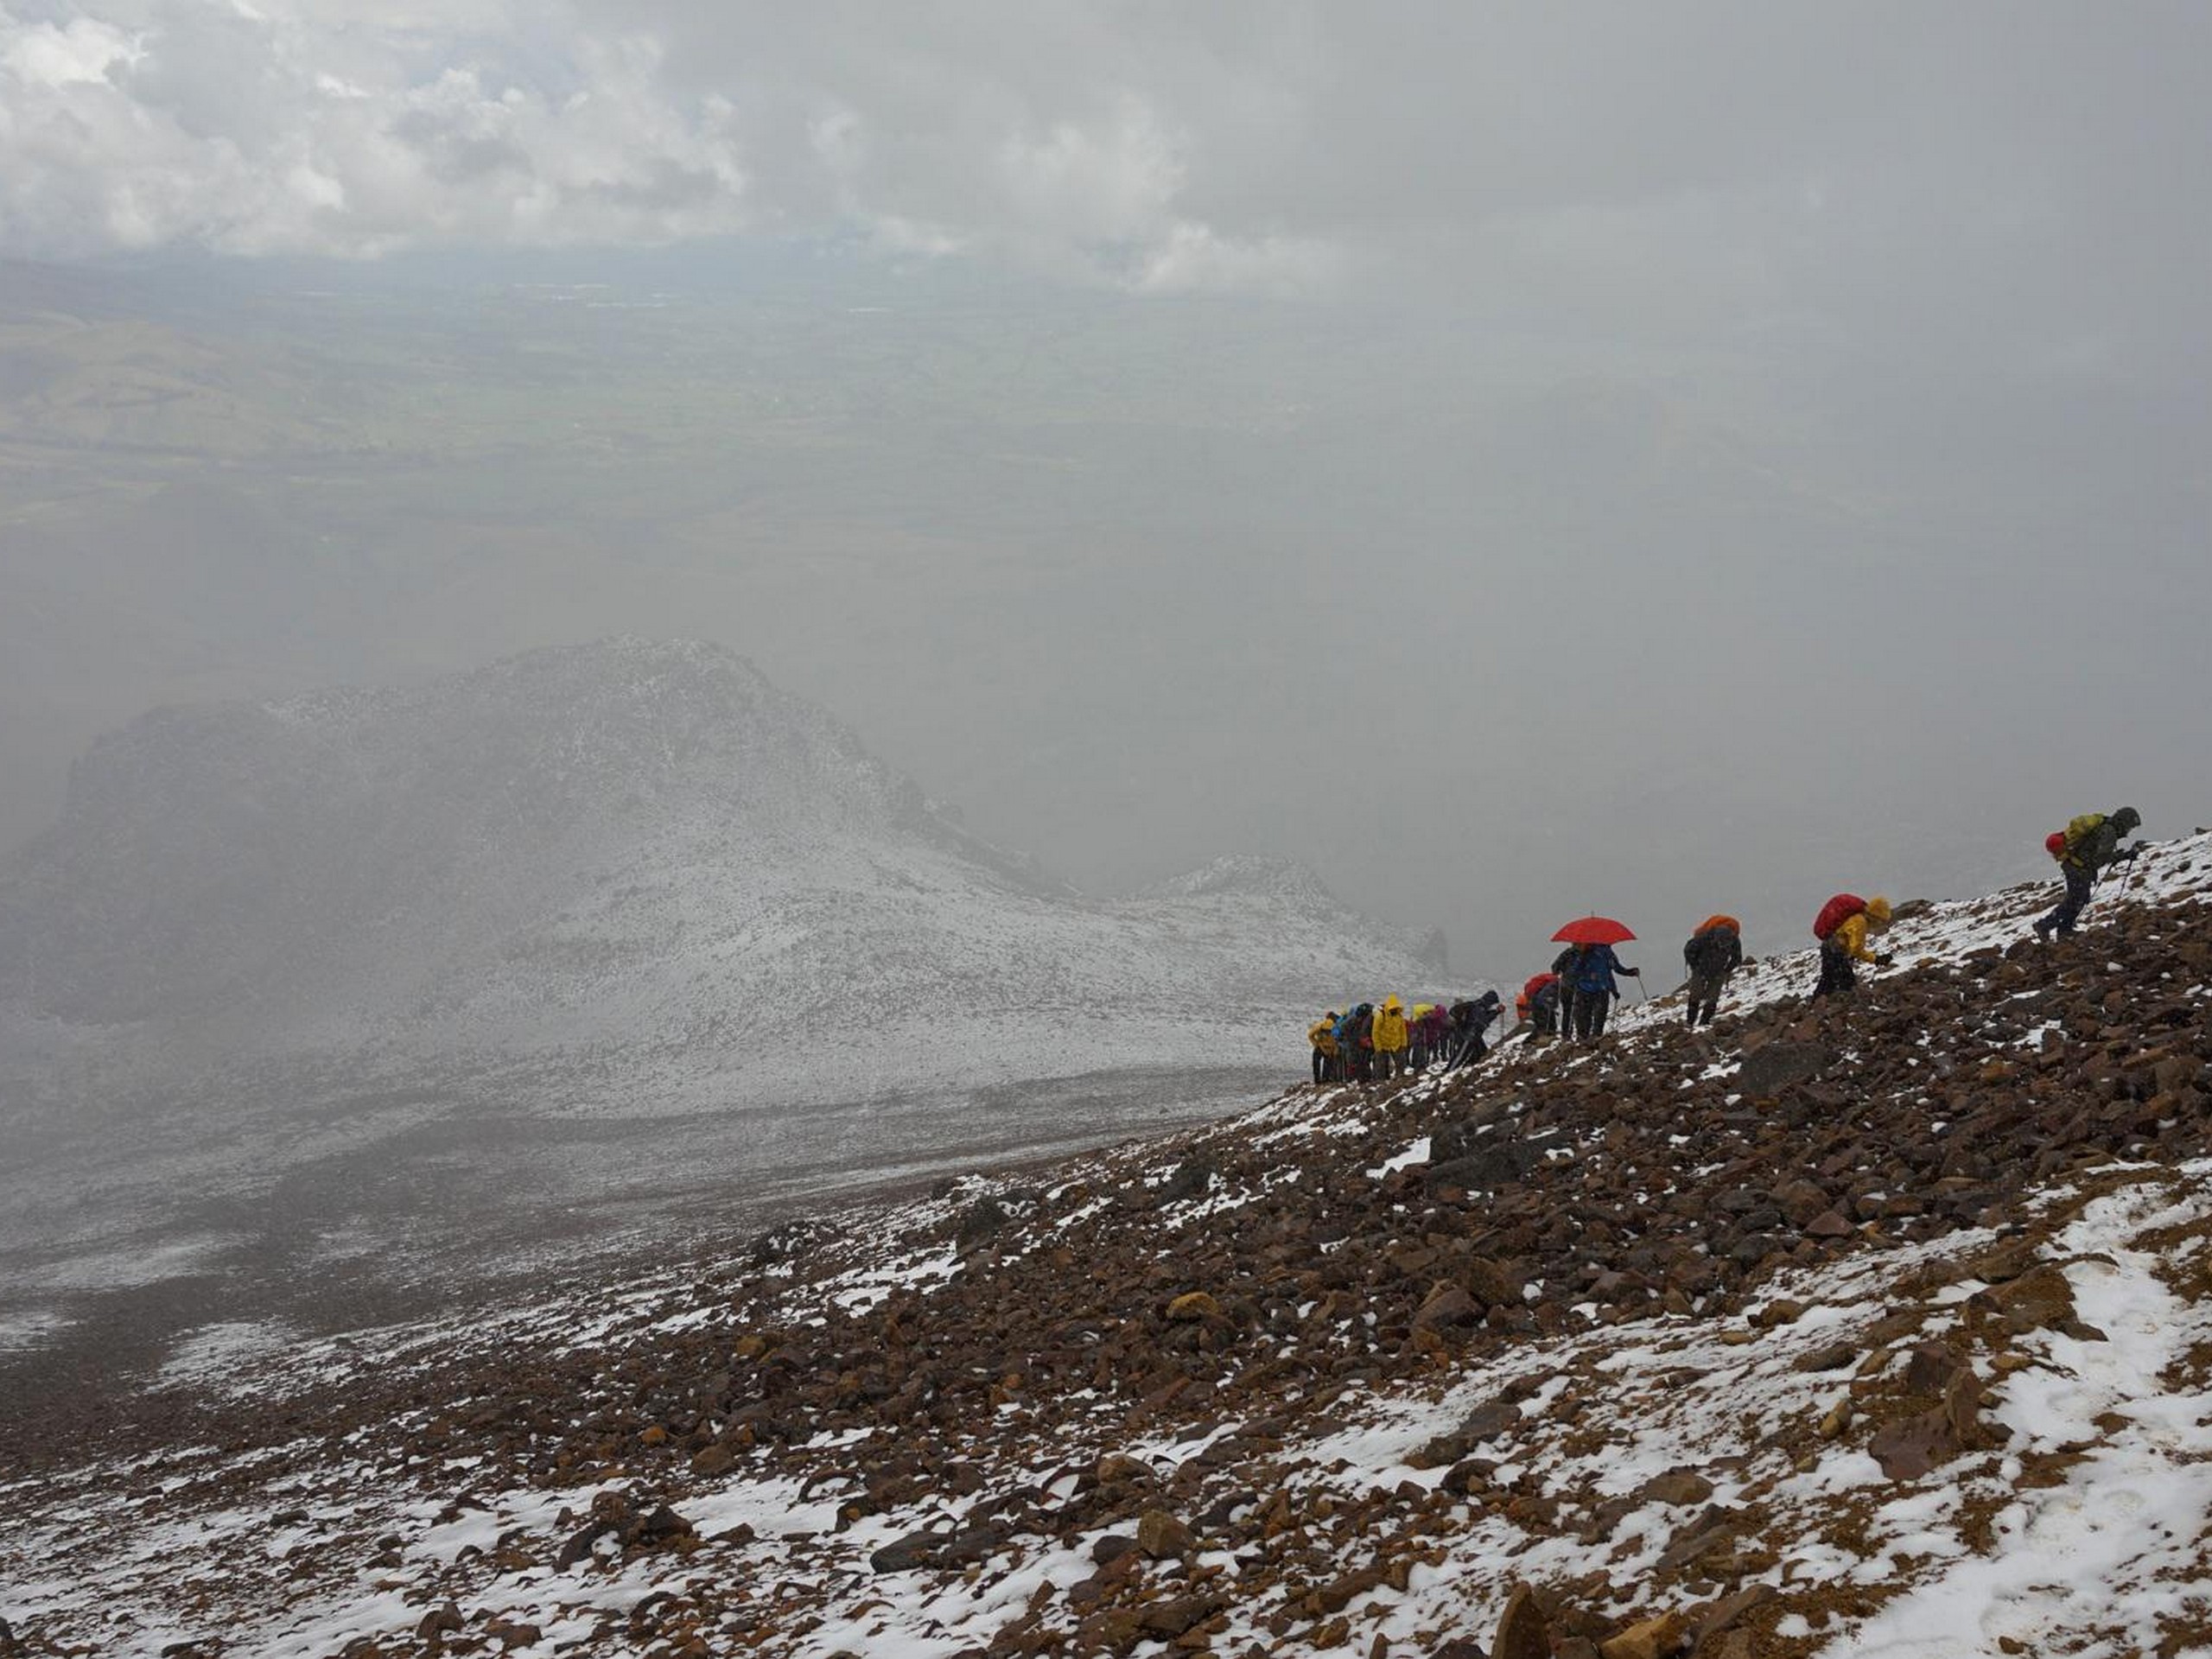 Group of hikers ascending the volcano in Ecuador